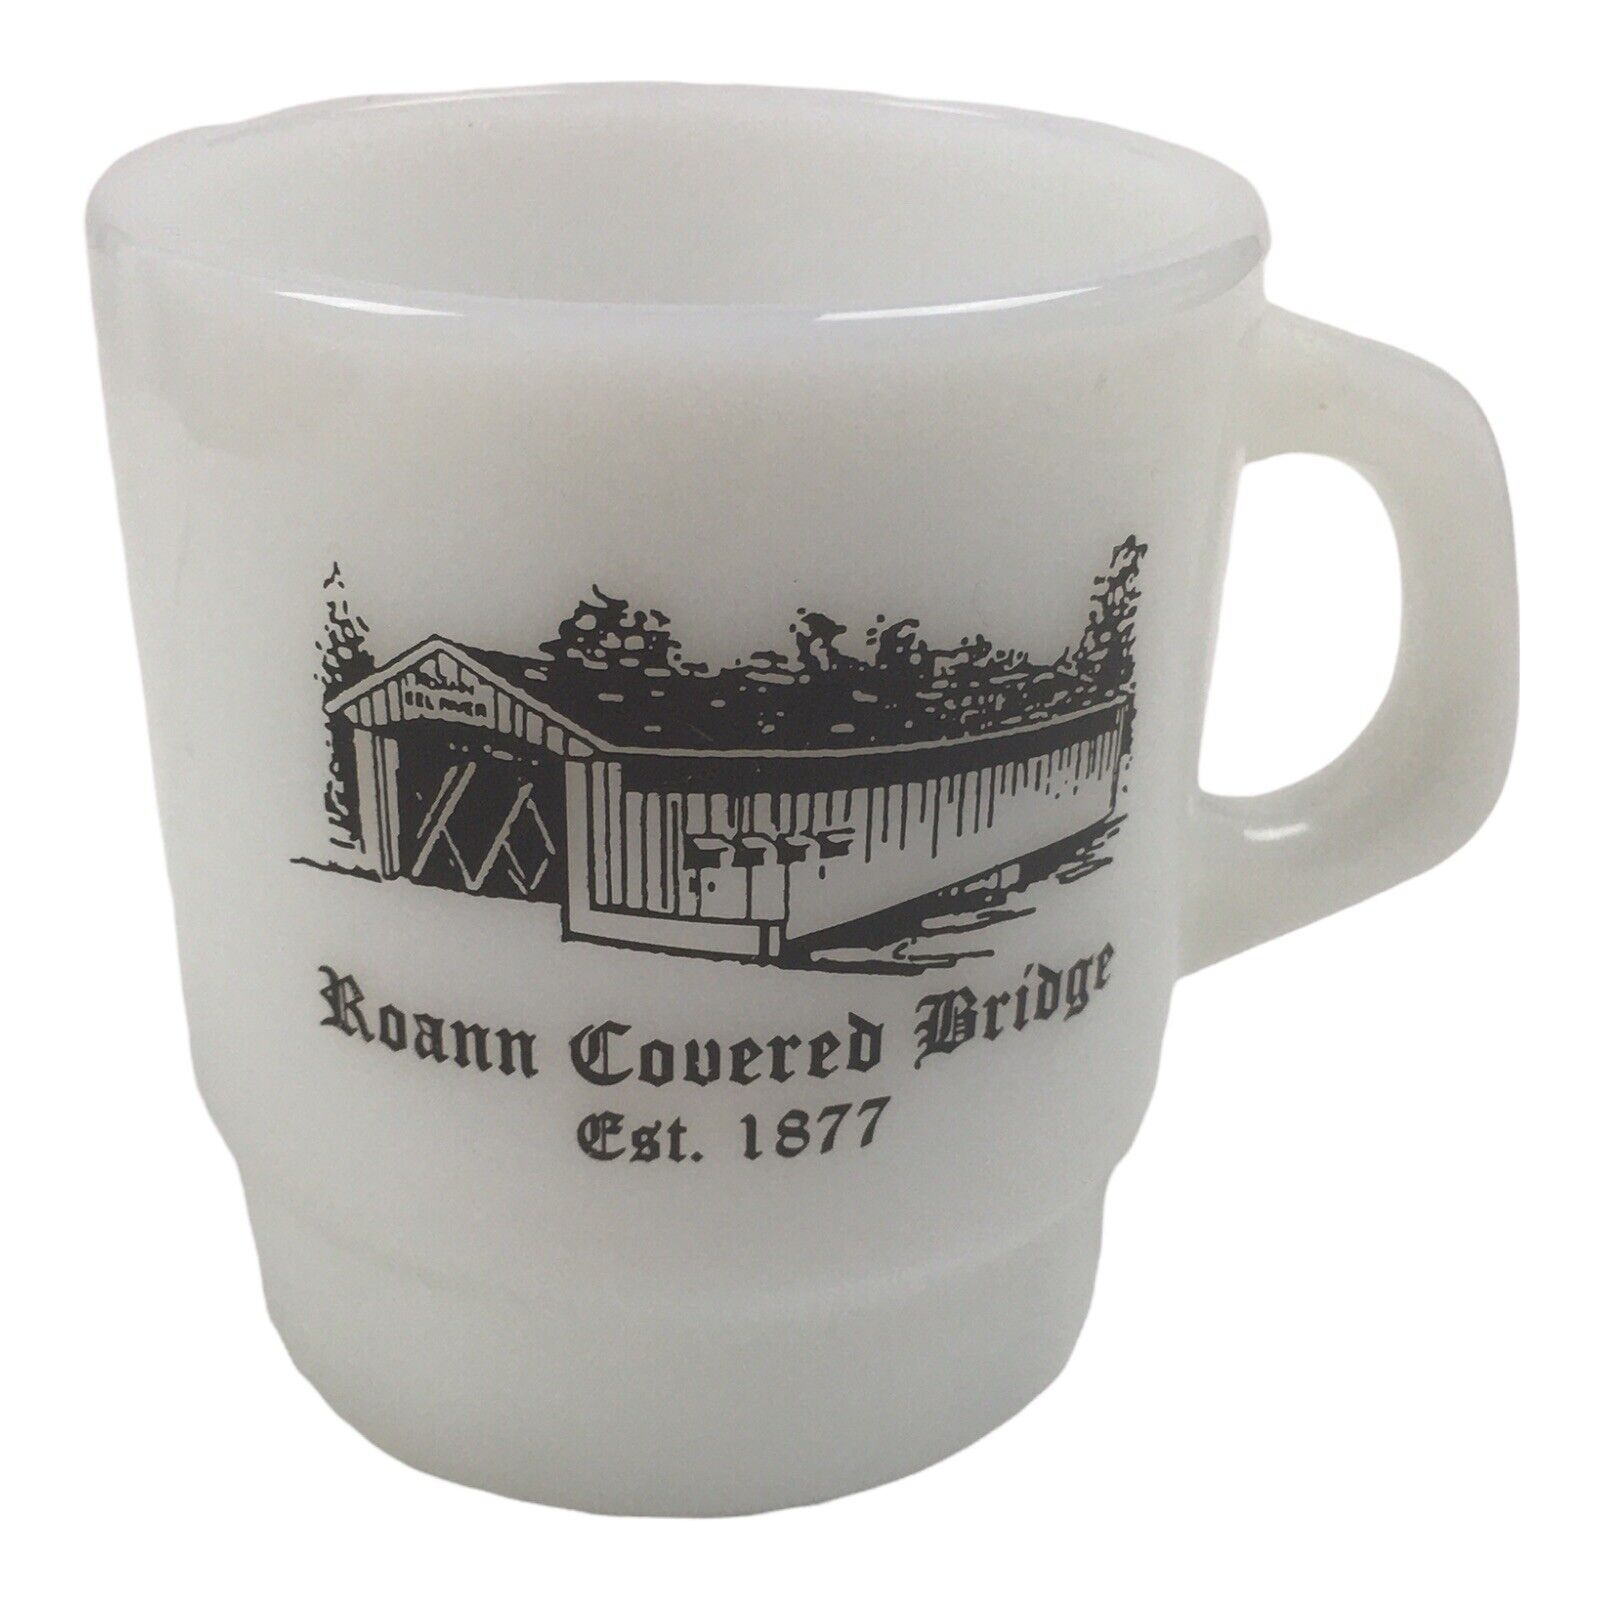 Fire King Roann Covered Bridge Mug Coffee Cup Stackable 10 oz Glass Indiana